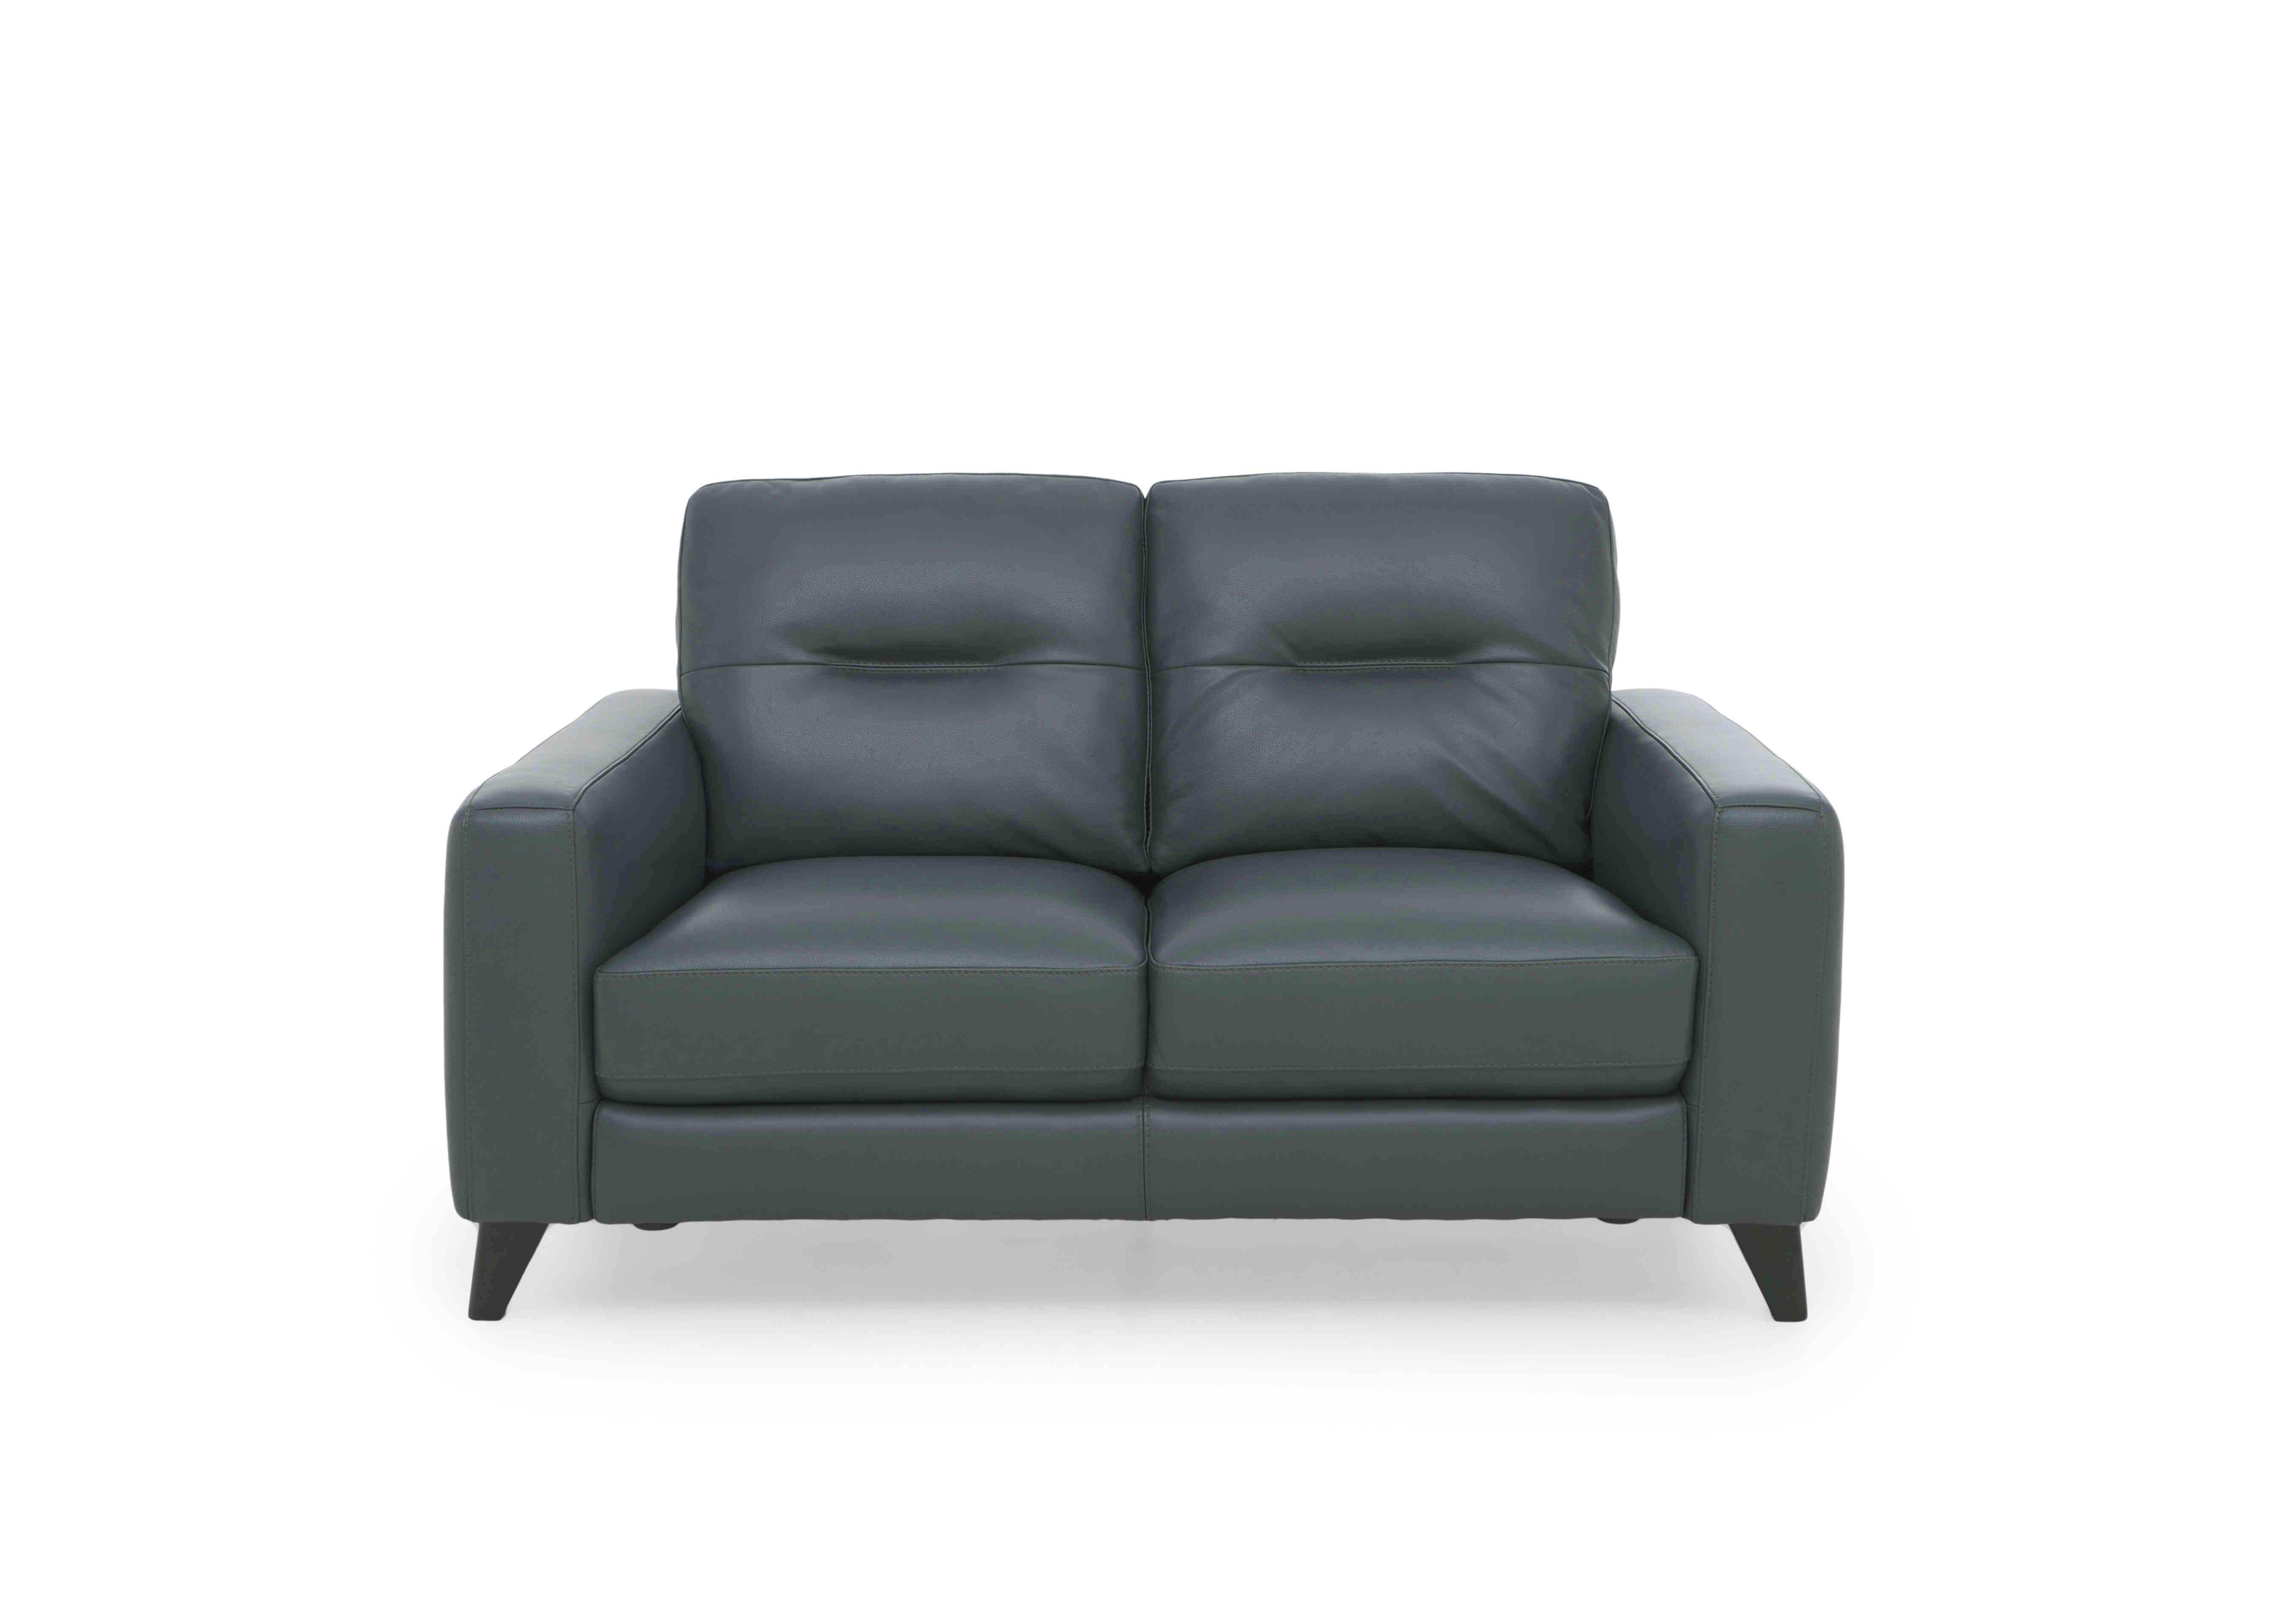 Jules 2 Seater Leather Sofa in Bv-301e Lake Green on Furniture Village